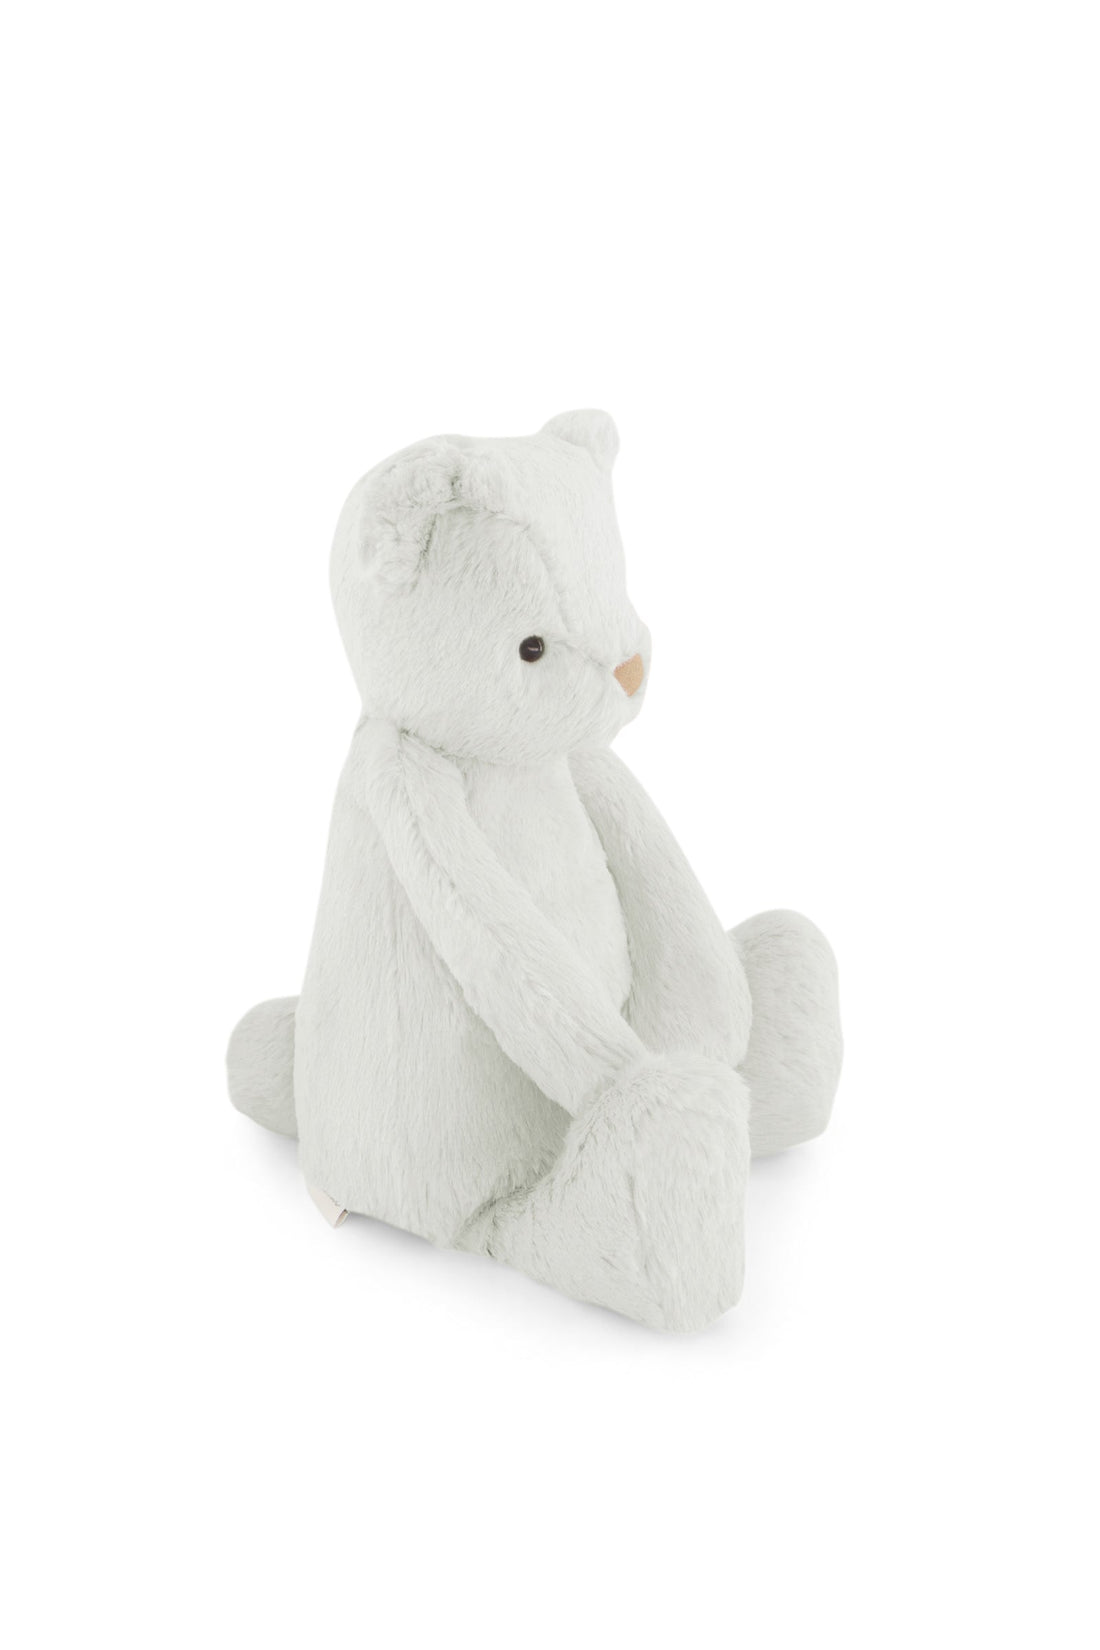 Snuggle Bunnies - George the Bear - Willow Childrens Toy from Jamie Kay USA